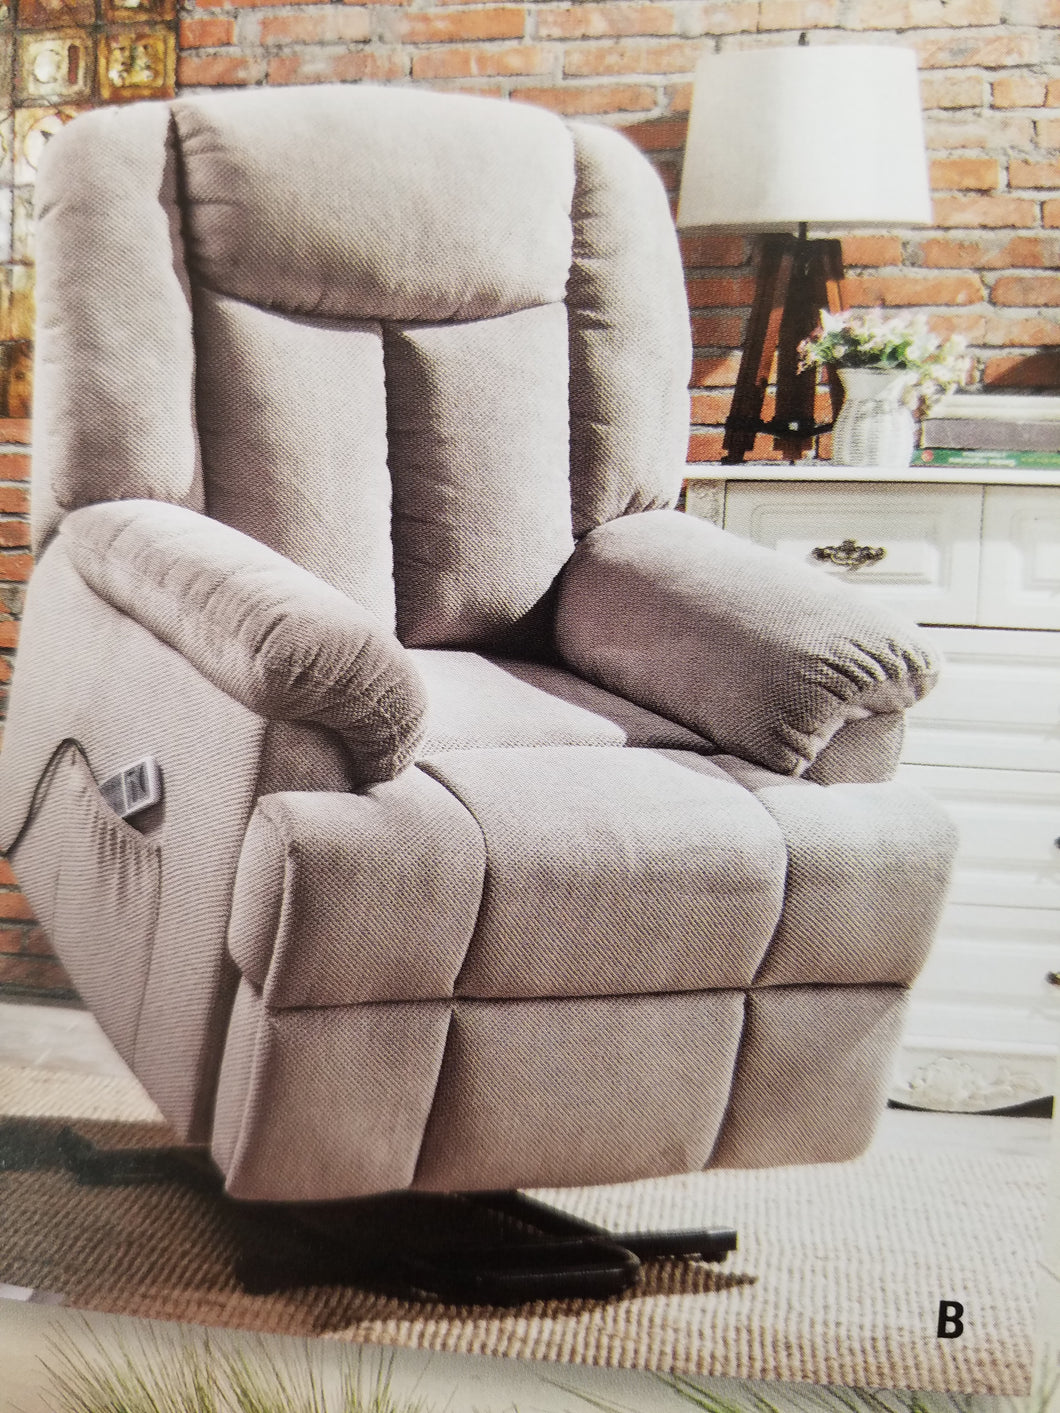 Easy-to-use and convenient Power Recliner with Lift and Massage features